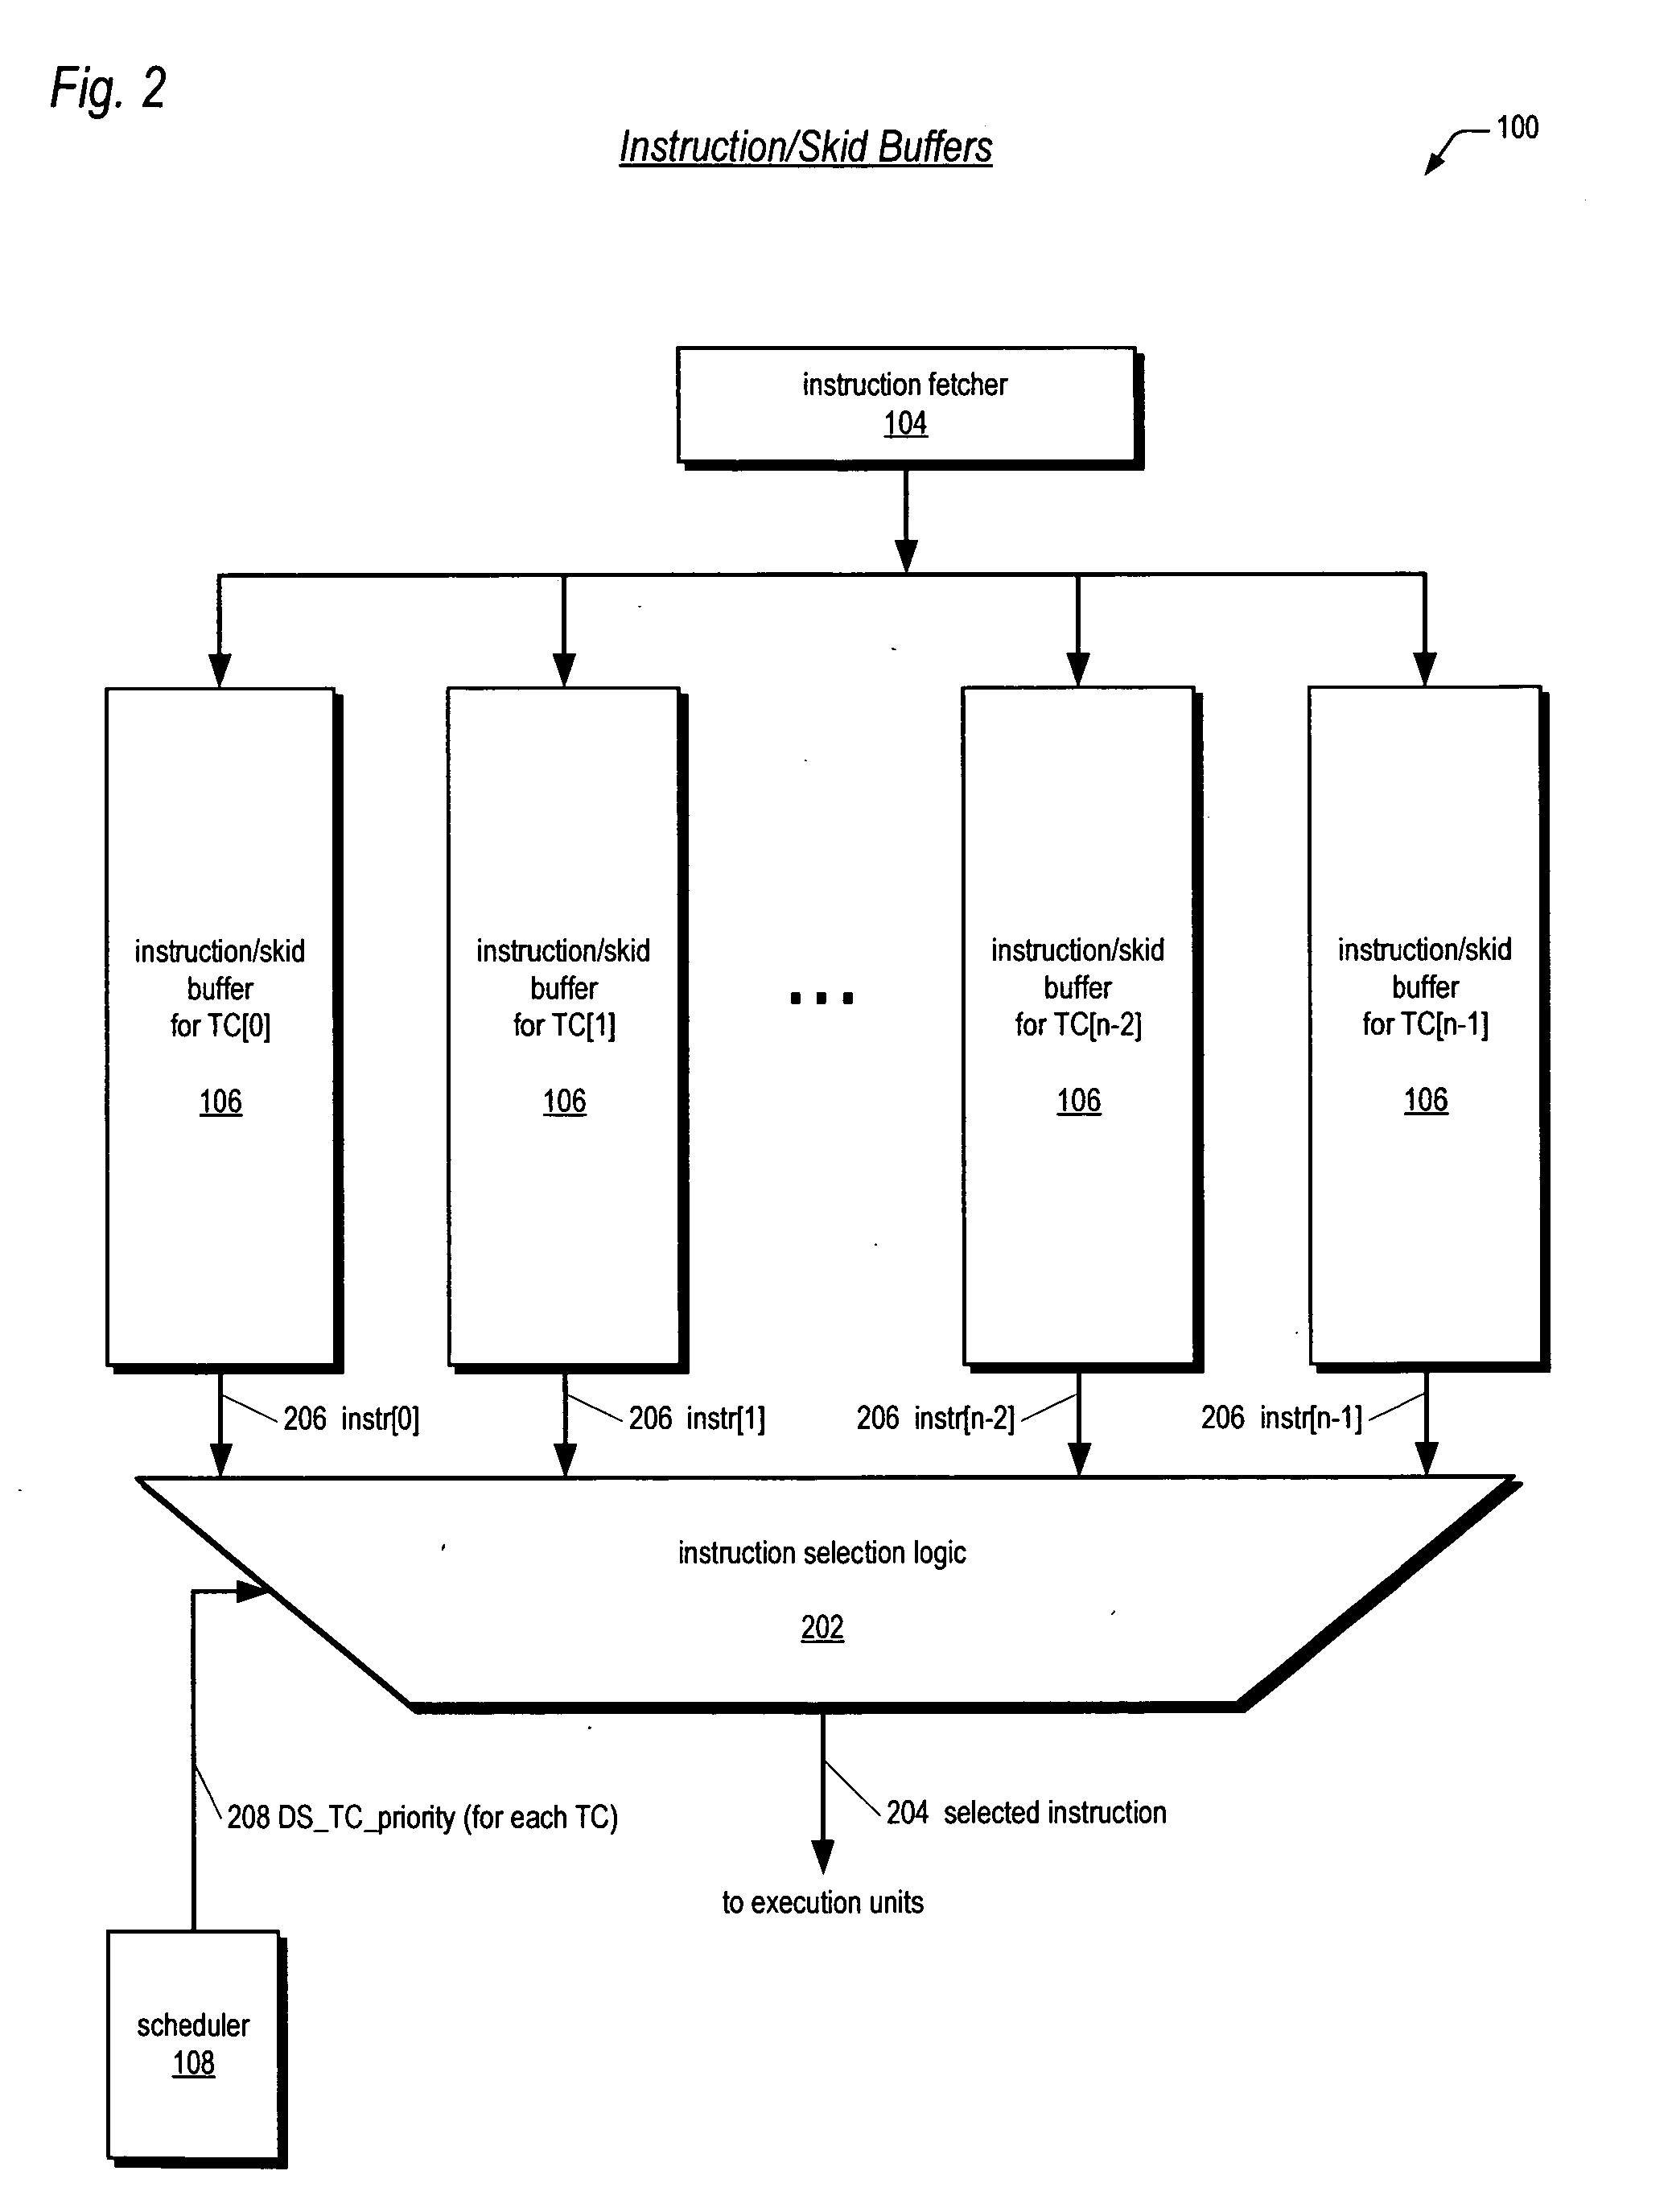 Instruction/skid buffers in a multithreading microprocessor